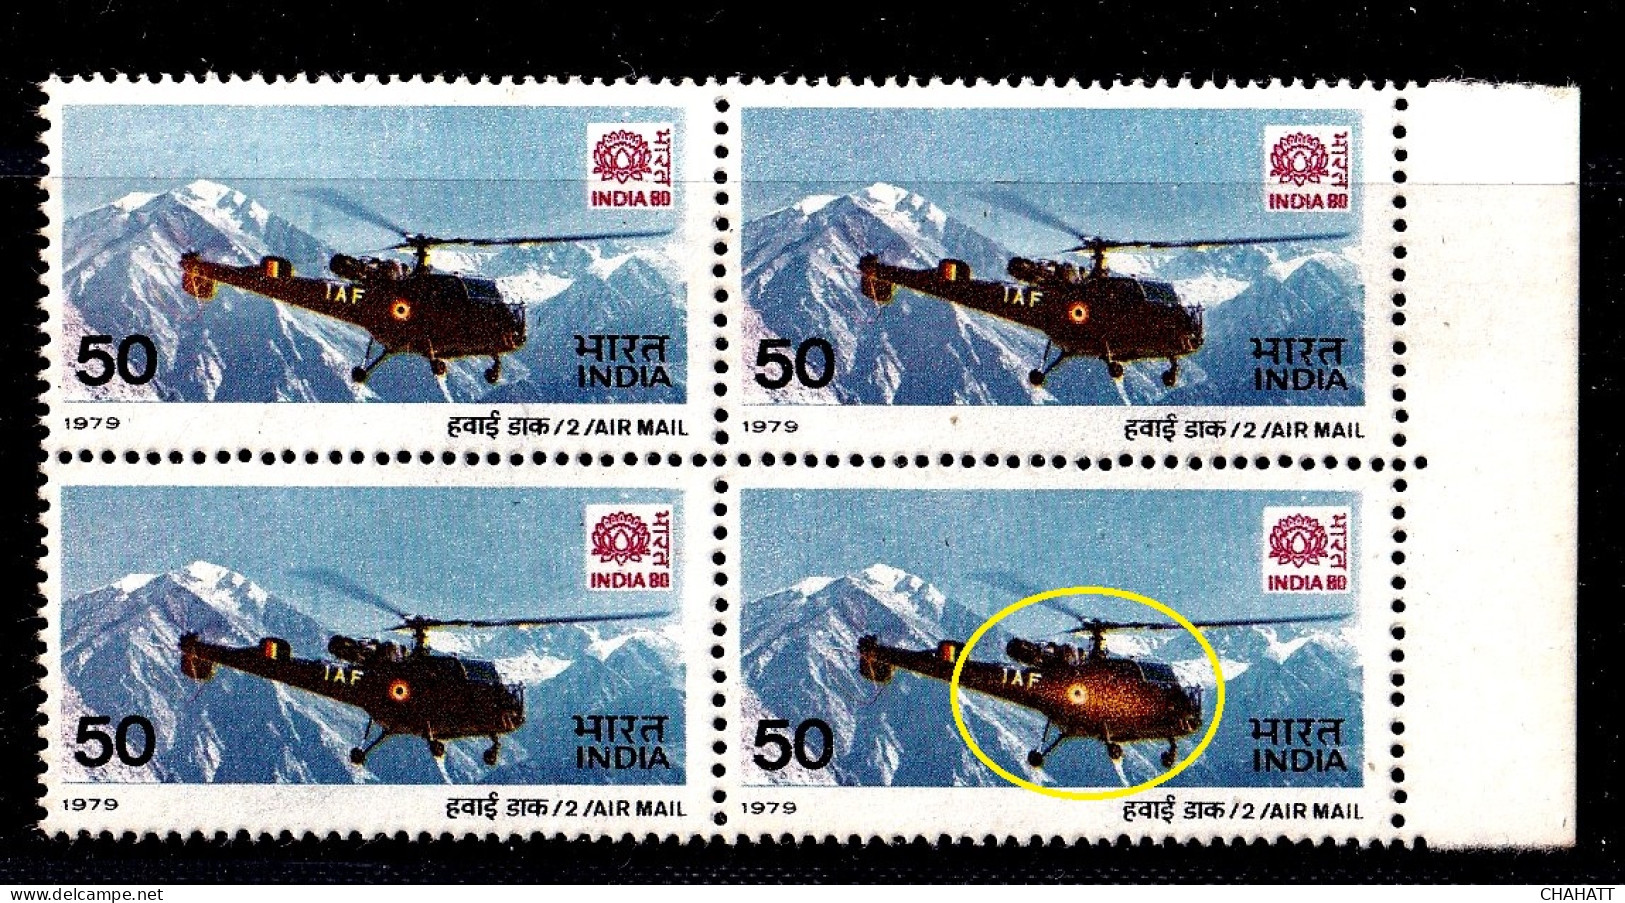 INDIA-1979- AIRMAIL-HELICOPTERS-50p- ERROR-COLOR VARIETY - BLOCK OF 4- H2-25 - Errors, Freaks & Oddities (EFO)